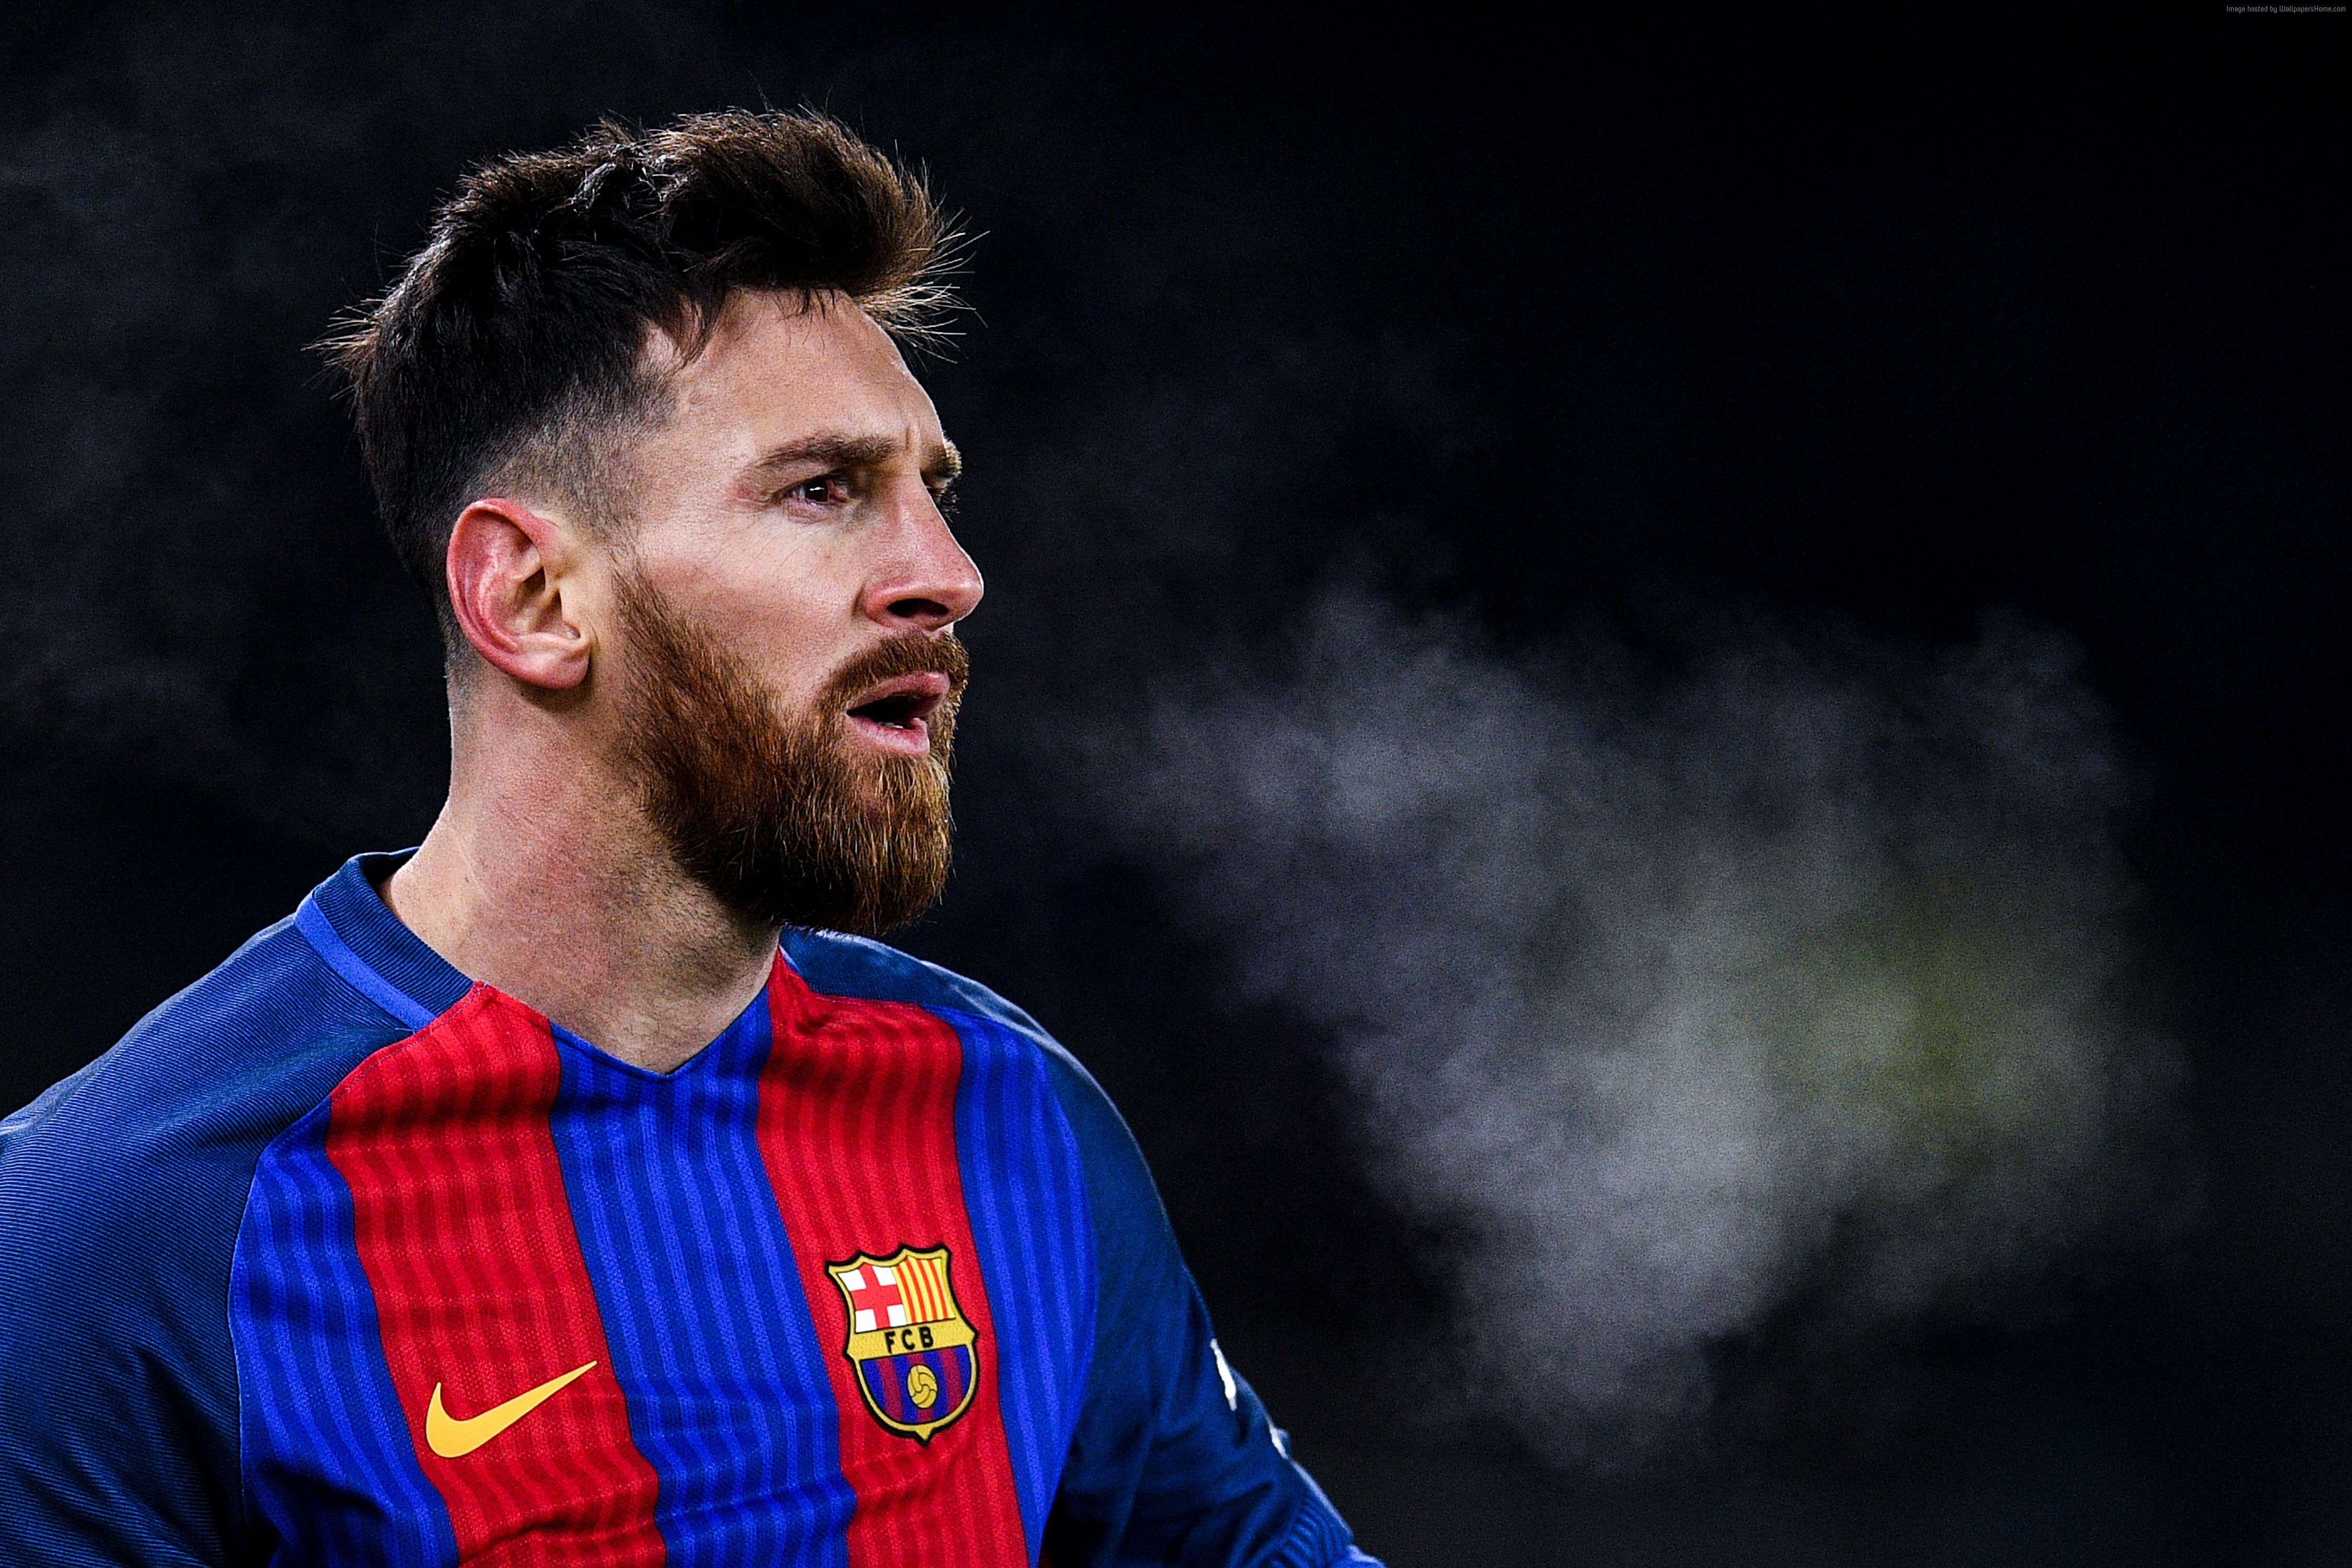 Free download Wallpaper Lionel Messi Soccer Football The Best 4500x3000